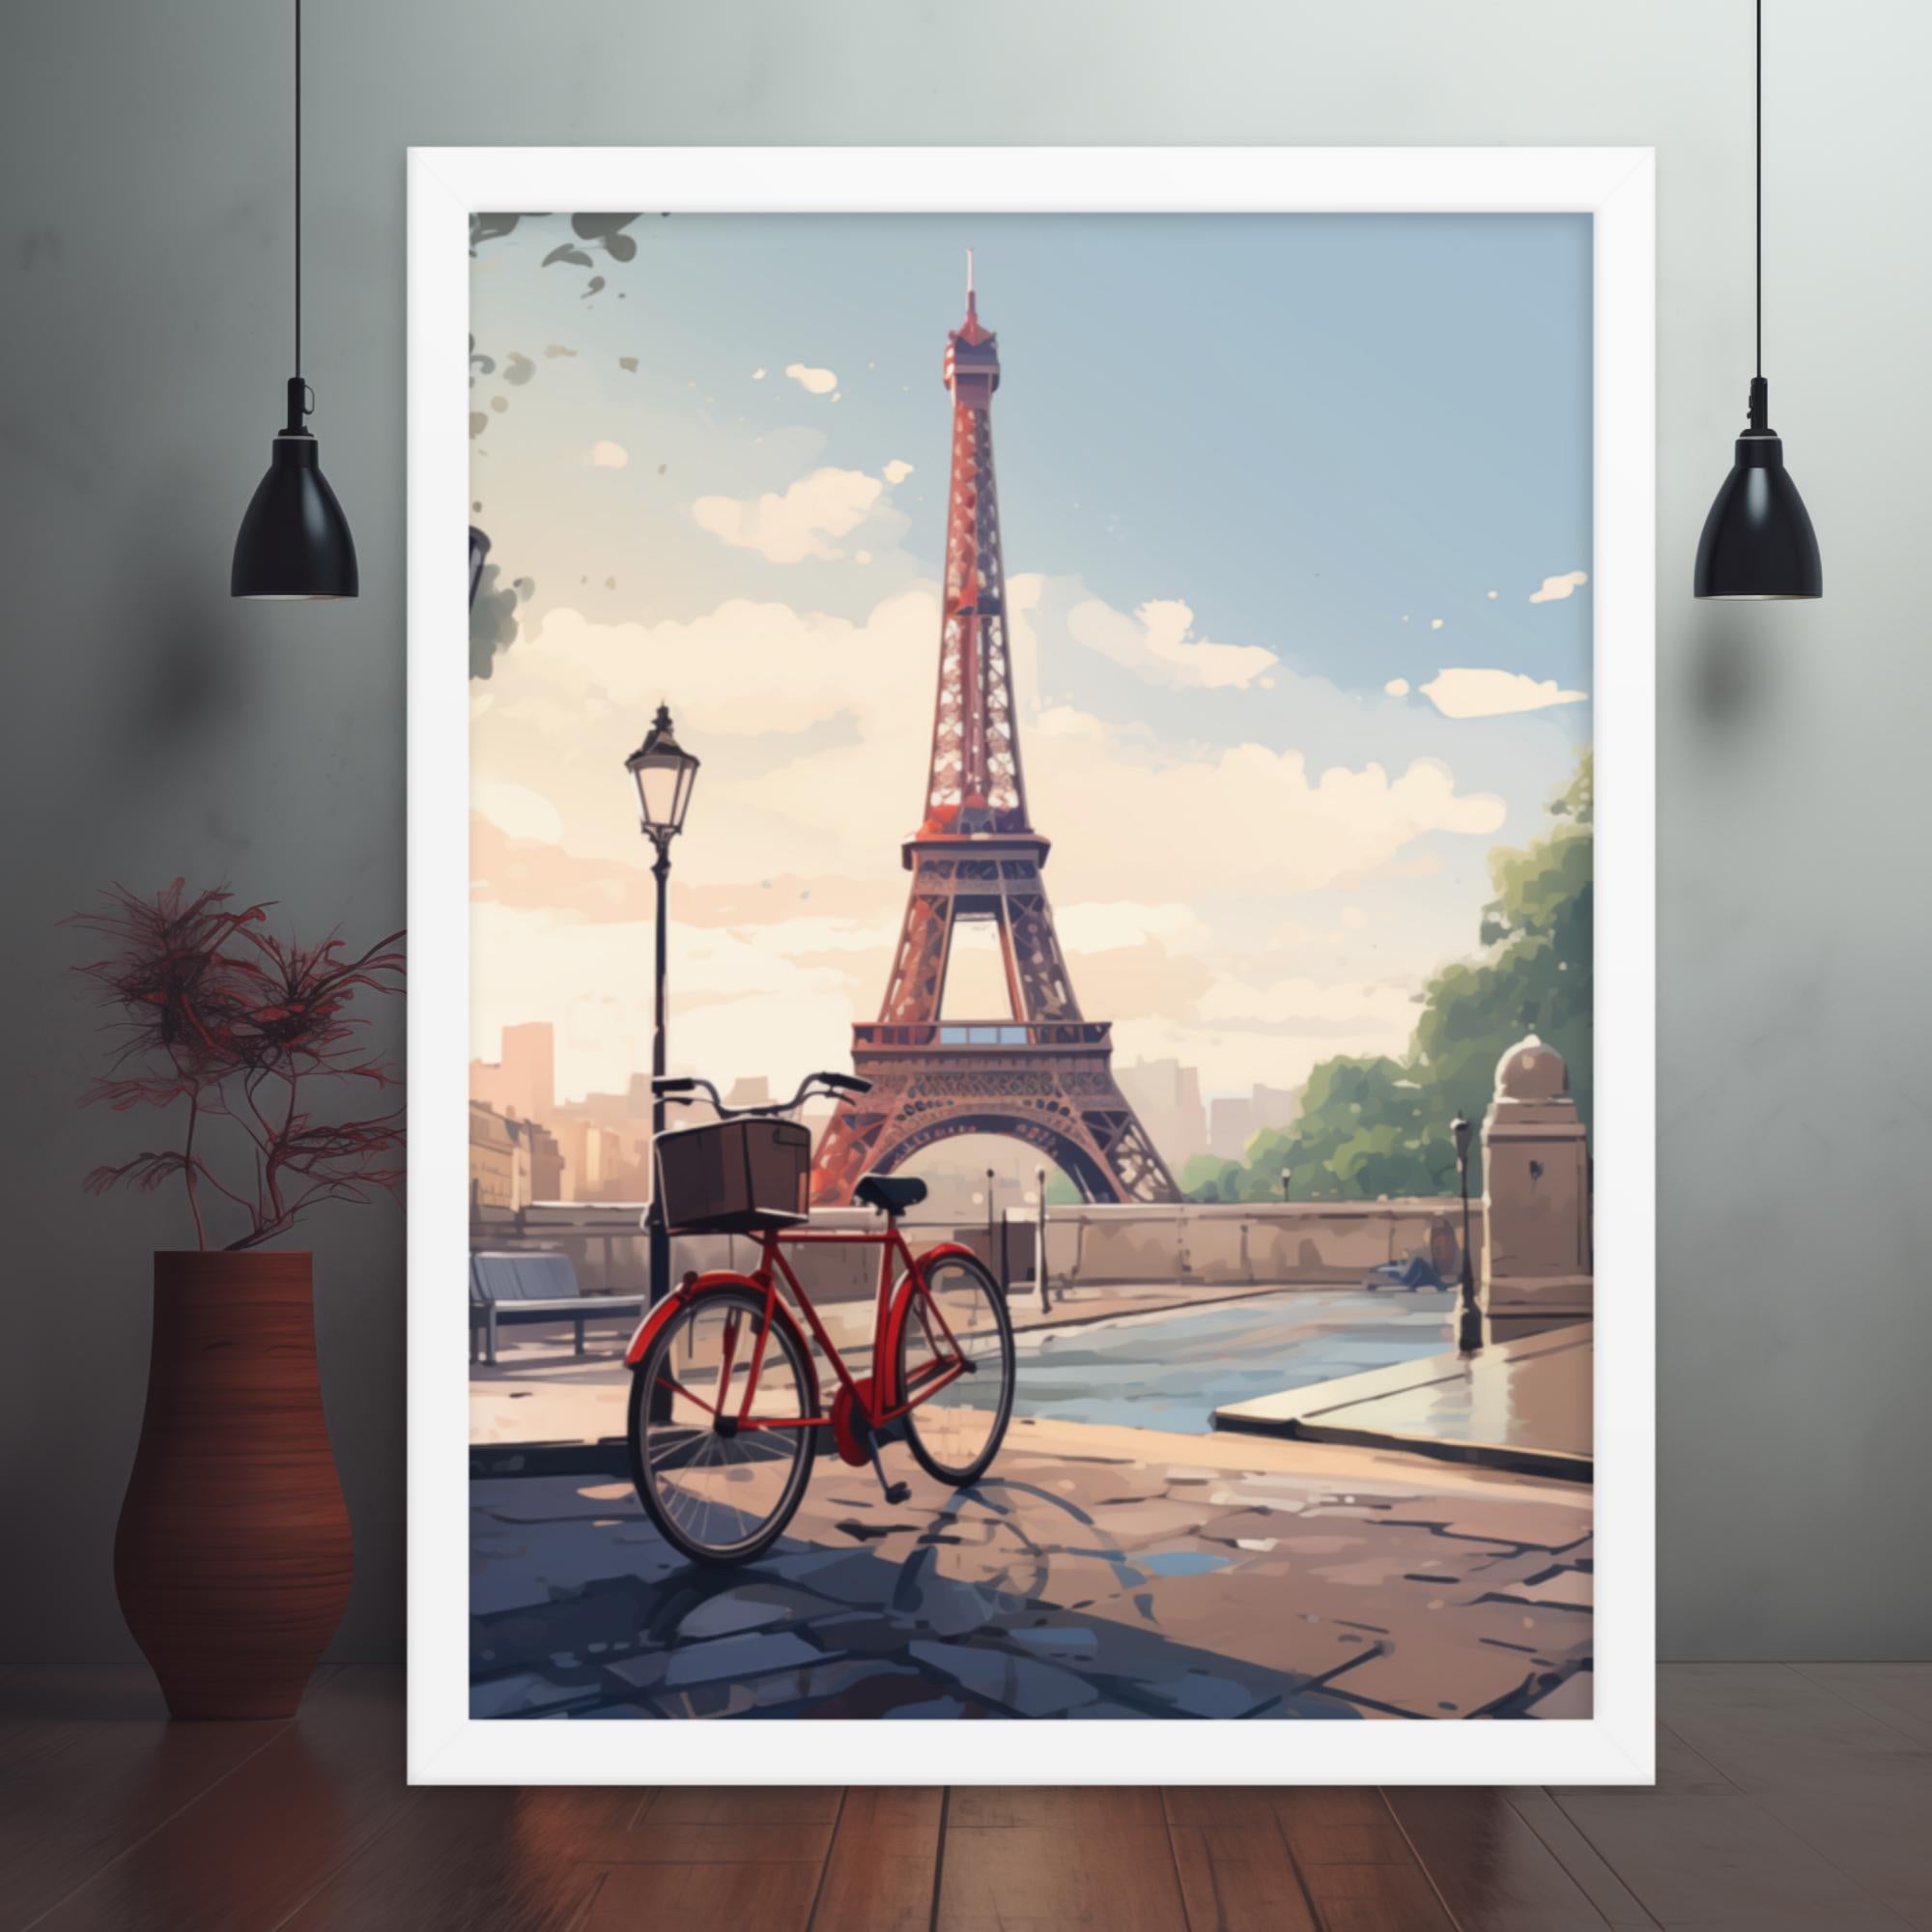 Parisian Serenity - A Gentle Pause Beneath the Eiffel Tower Framed Poster